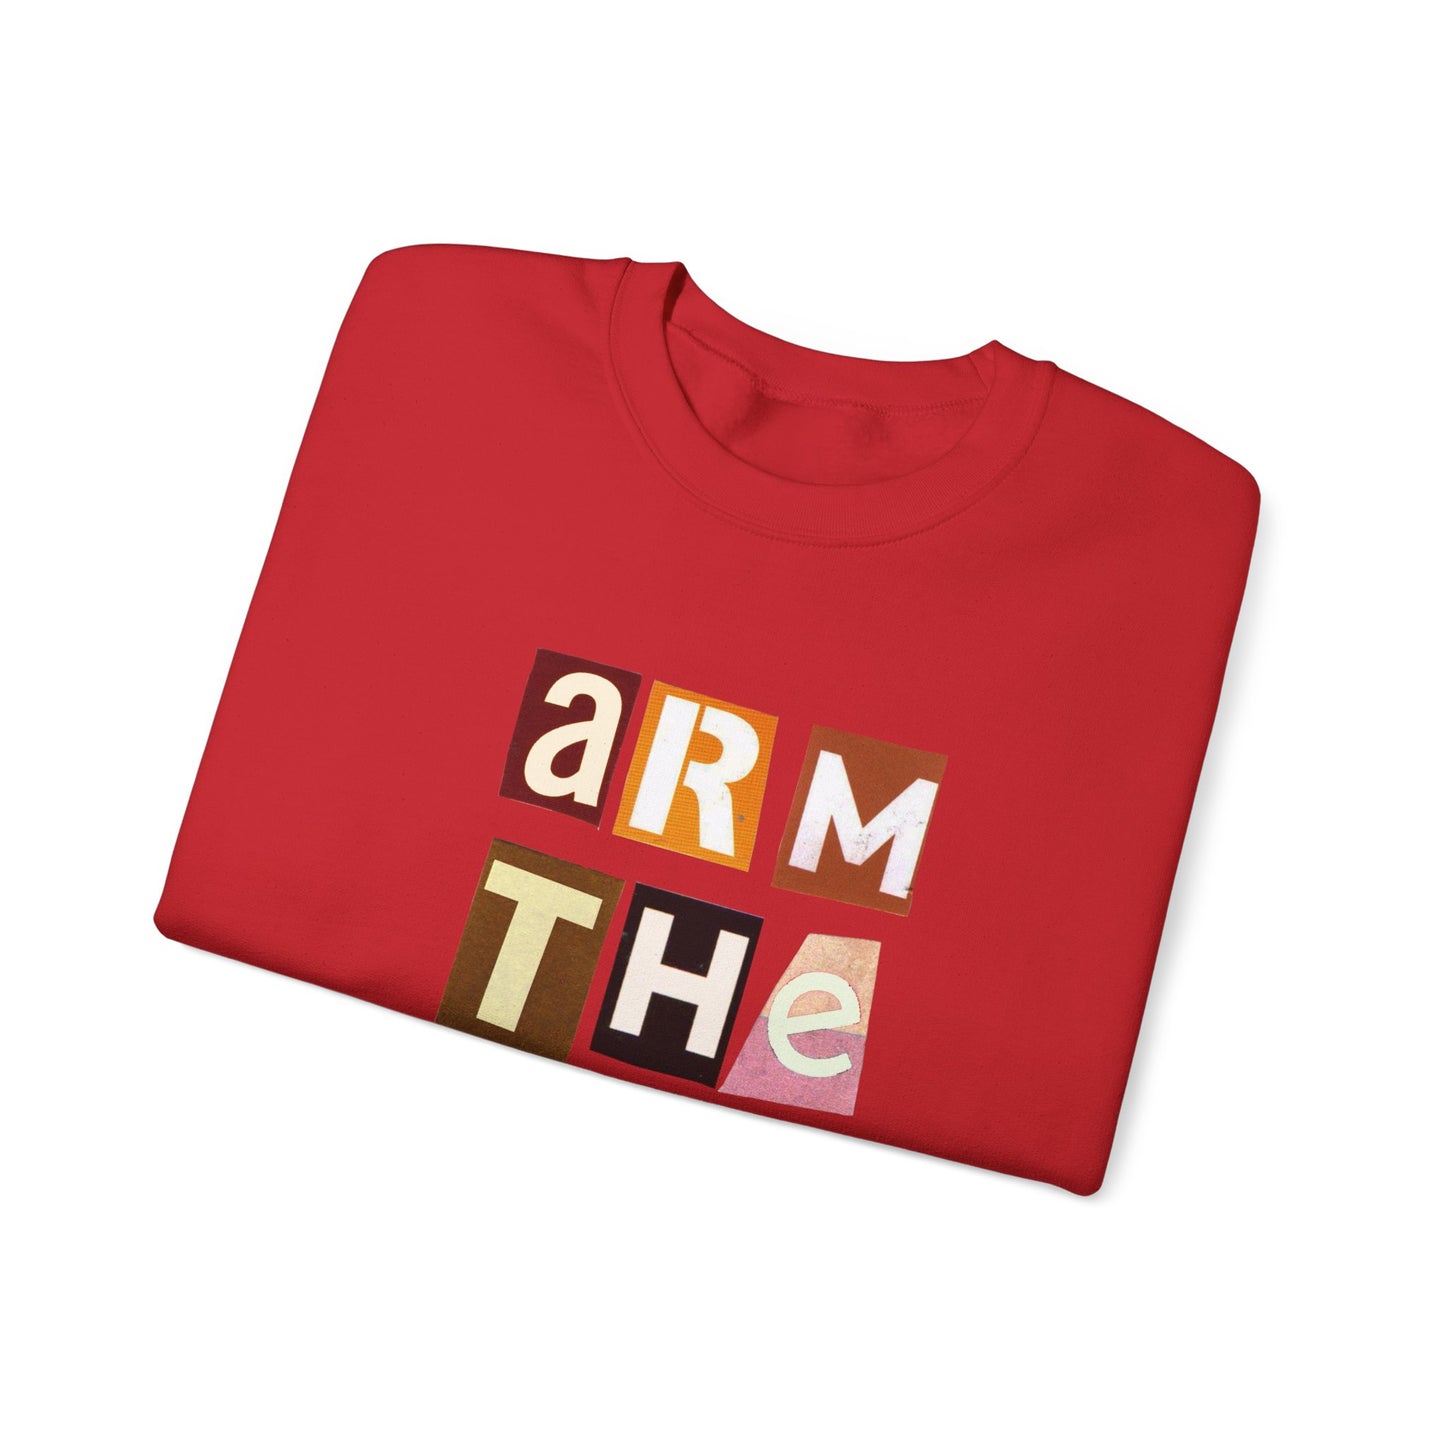 "Arm the poor" by Tin Foil Wear